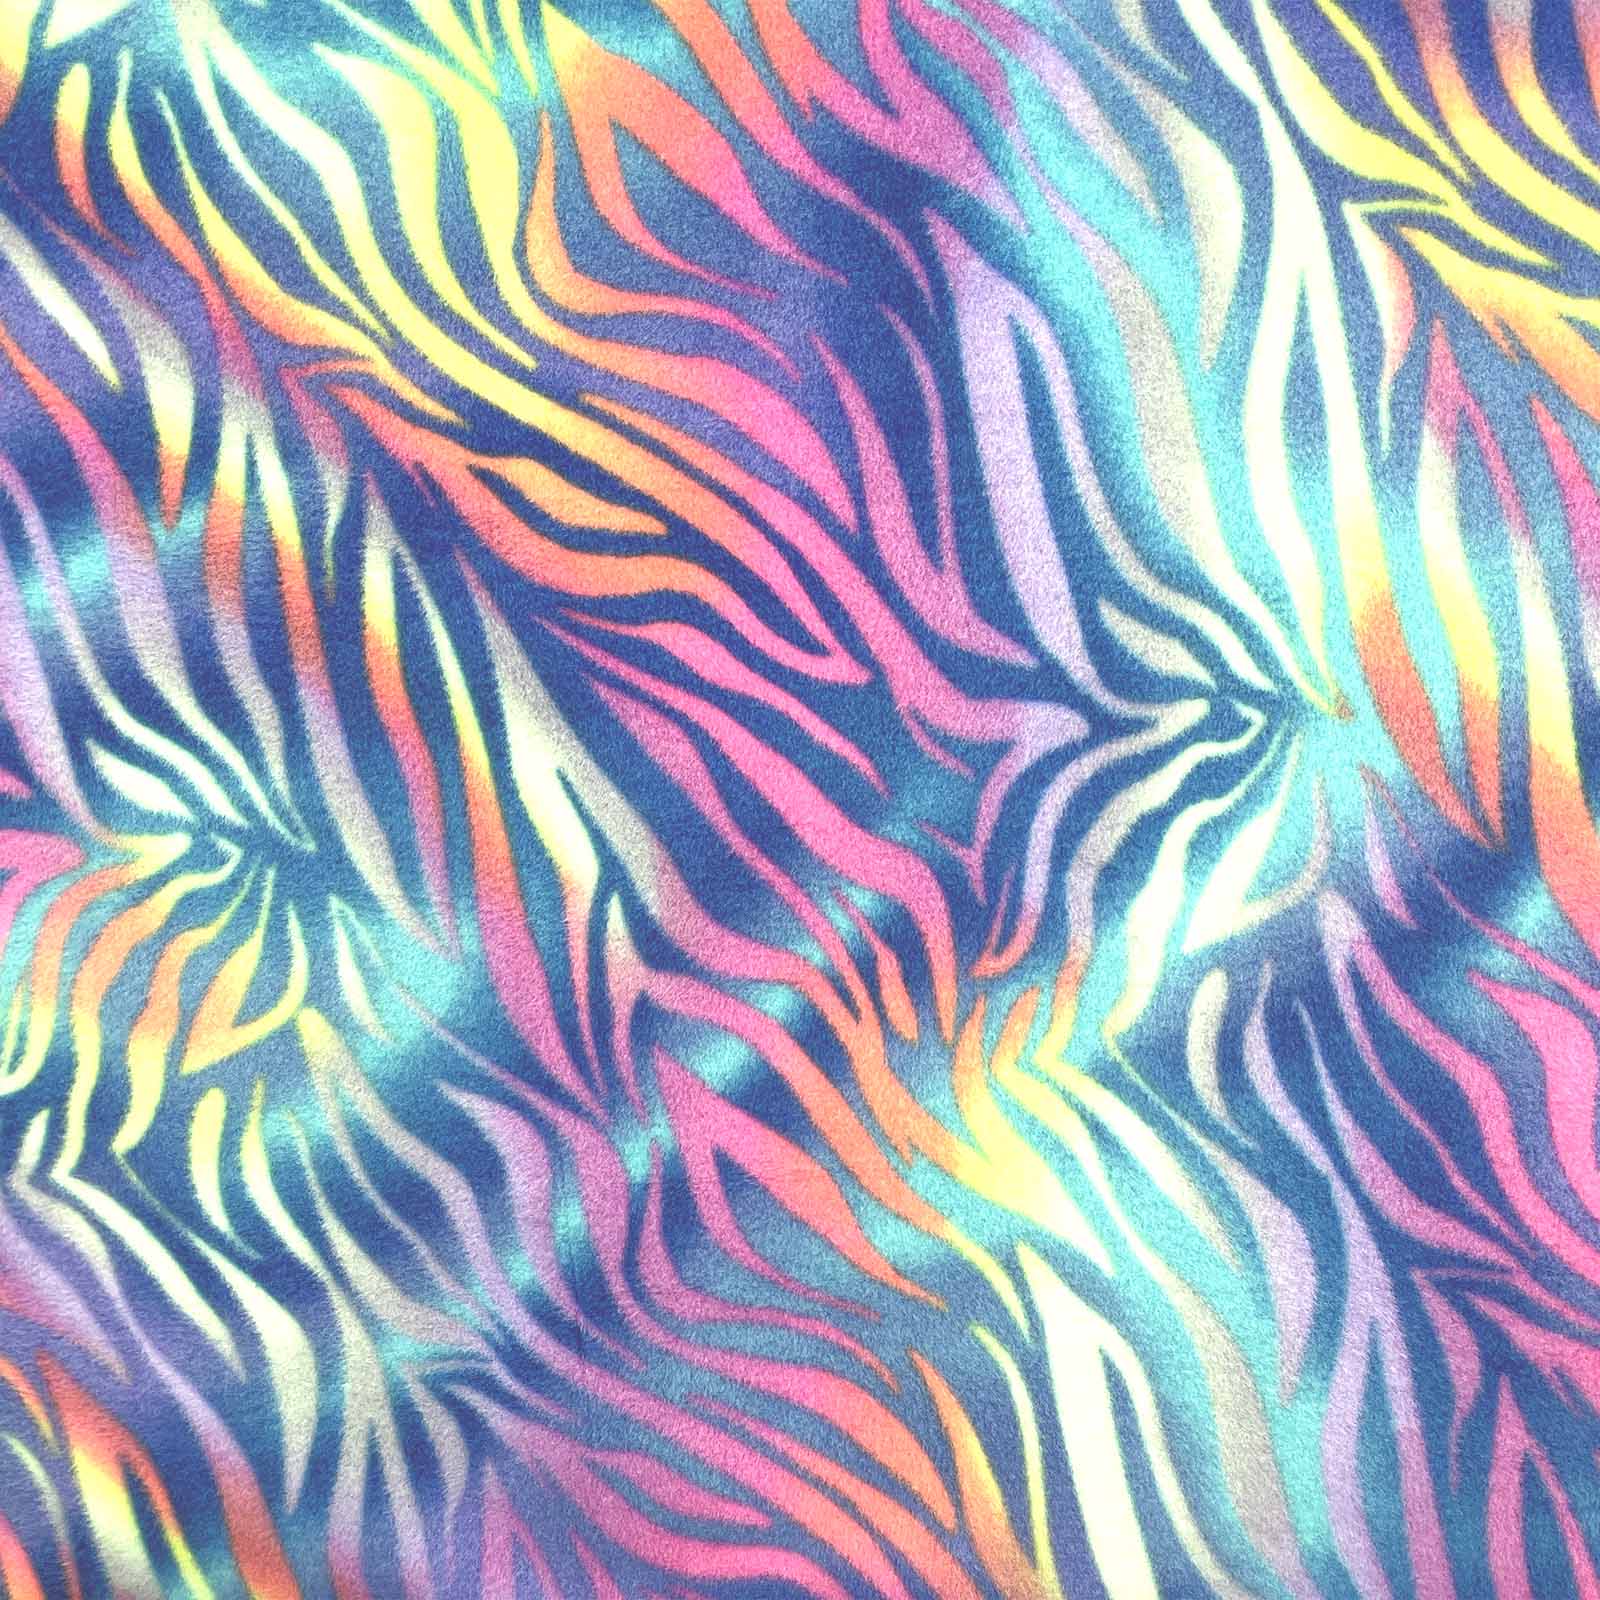 Trippy Zebra fabric in fleece for guinea pig cages